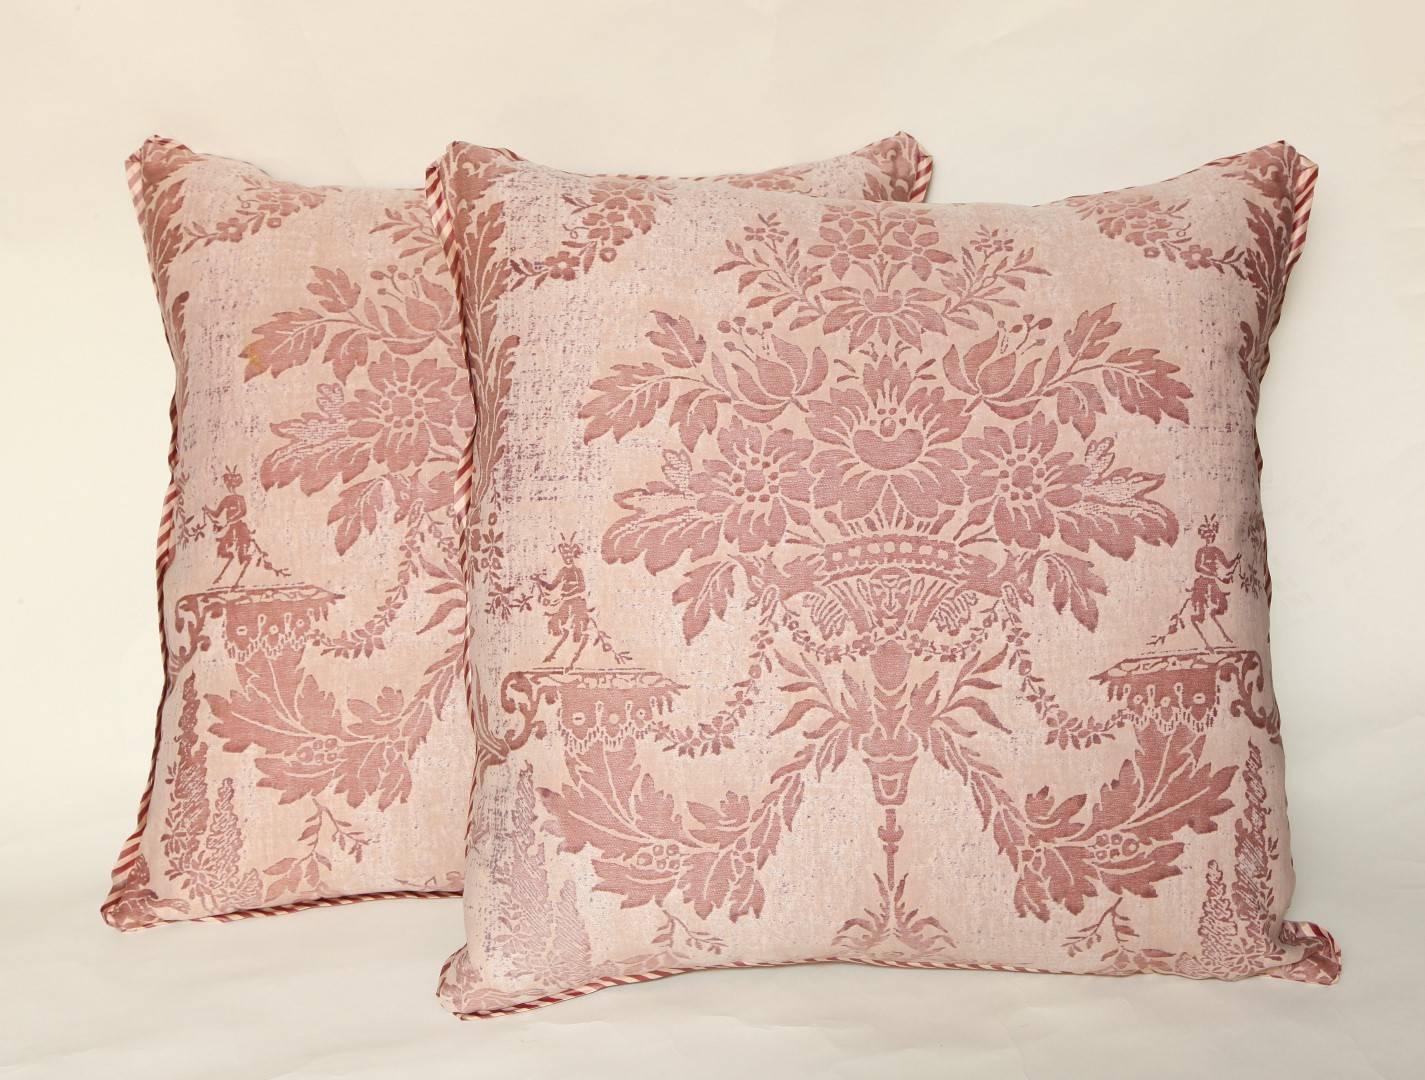 A pair of vintage Fortuny cushions in the Boucher pattern, beige and rose color way with bias silk striped edging and raw silk back, the Boucher pattern named for the most celebrated painter and decorative artist of the 18th century, Francois